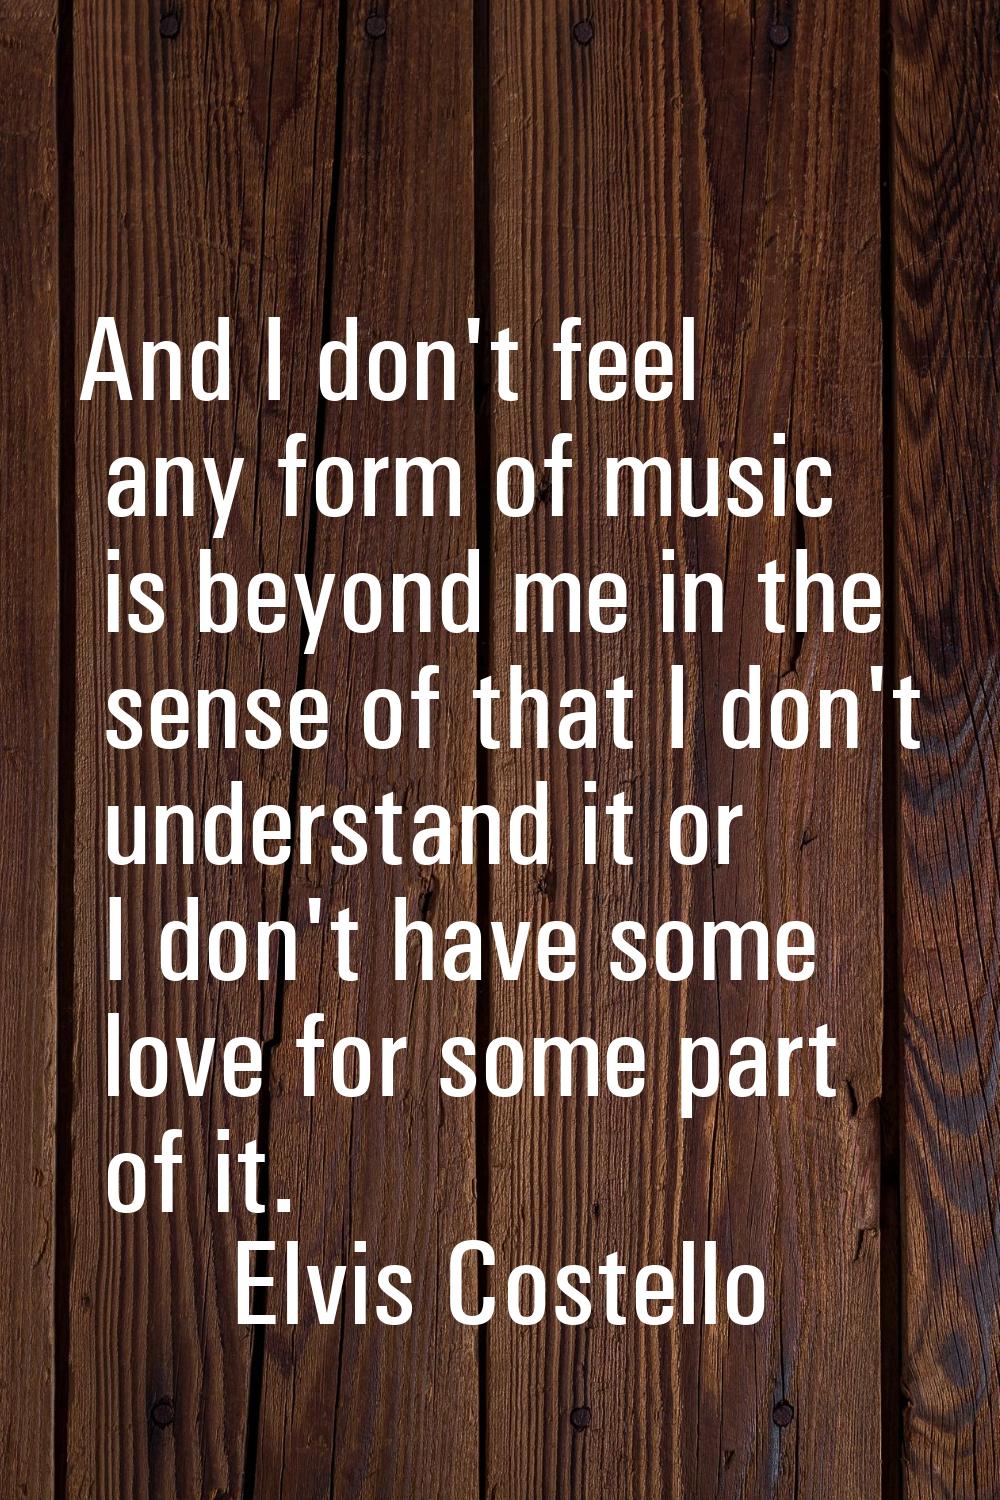 And I don't feel any form of music is beyond me in the sense of that I don't understand it or I don